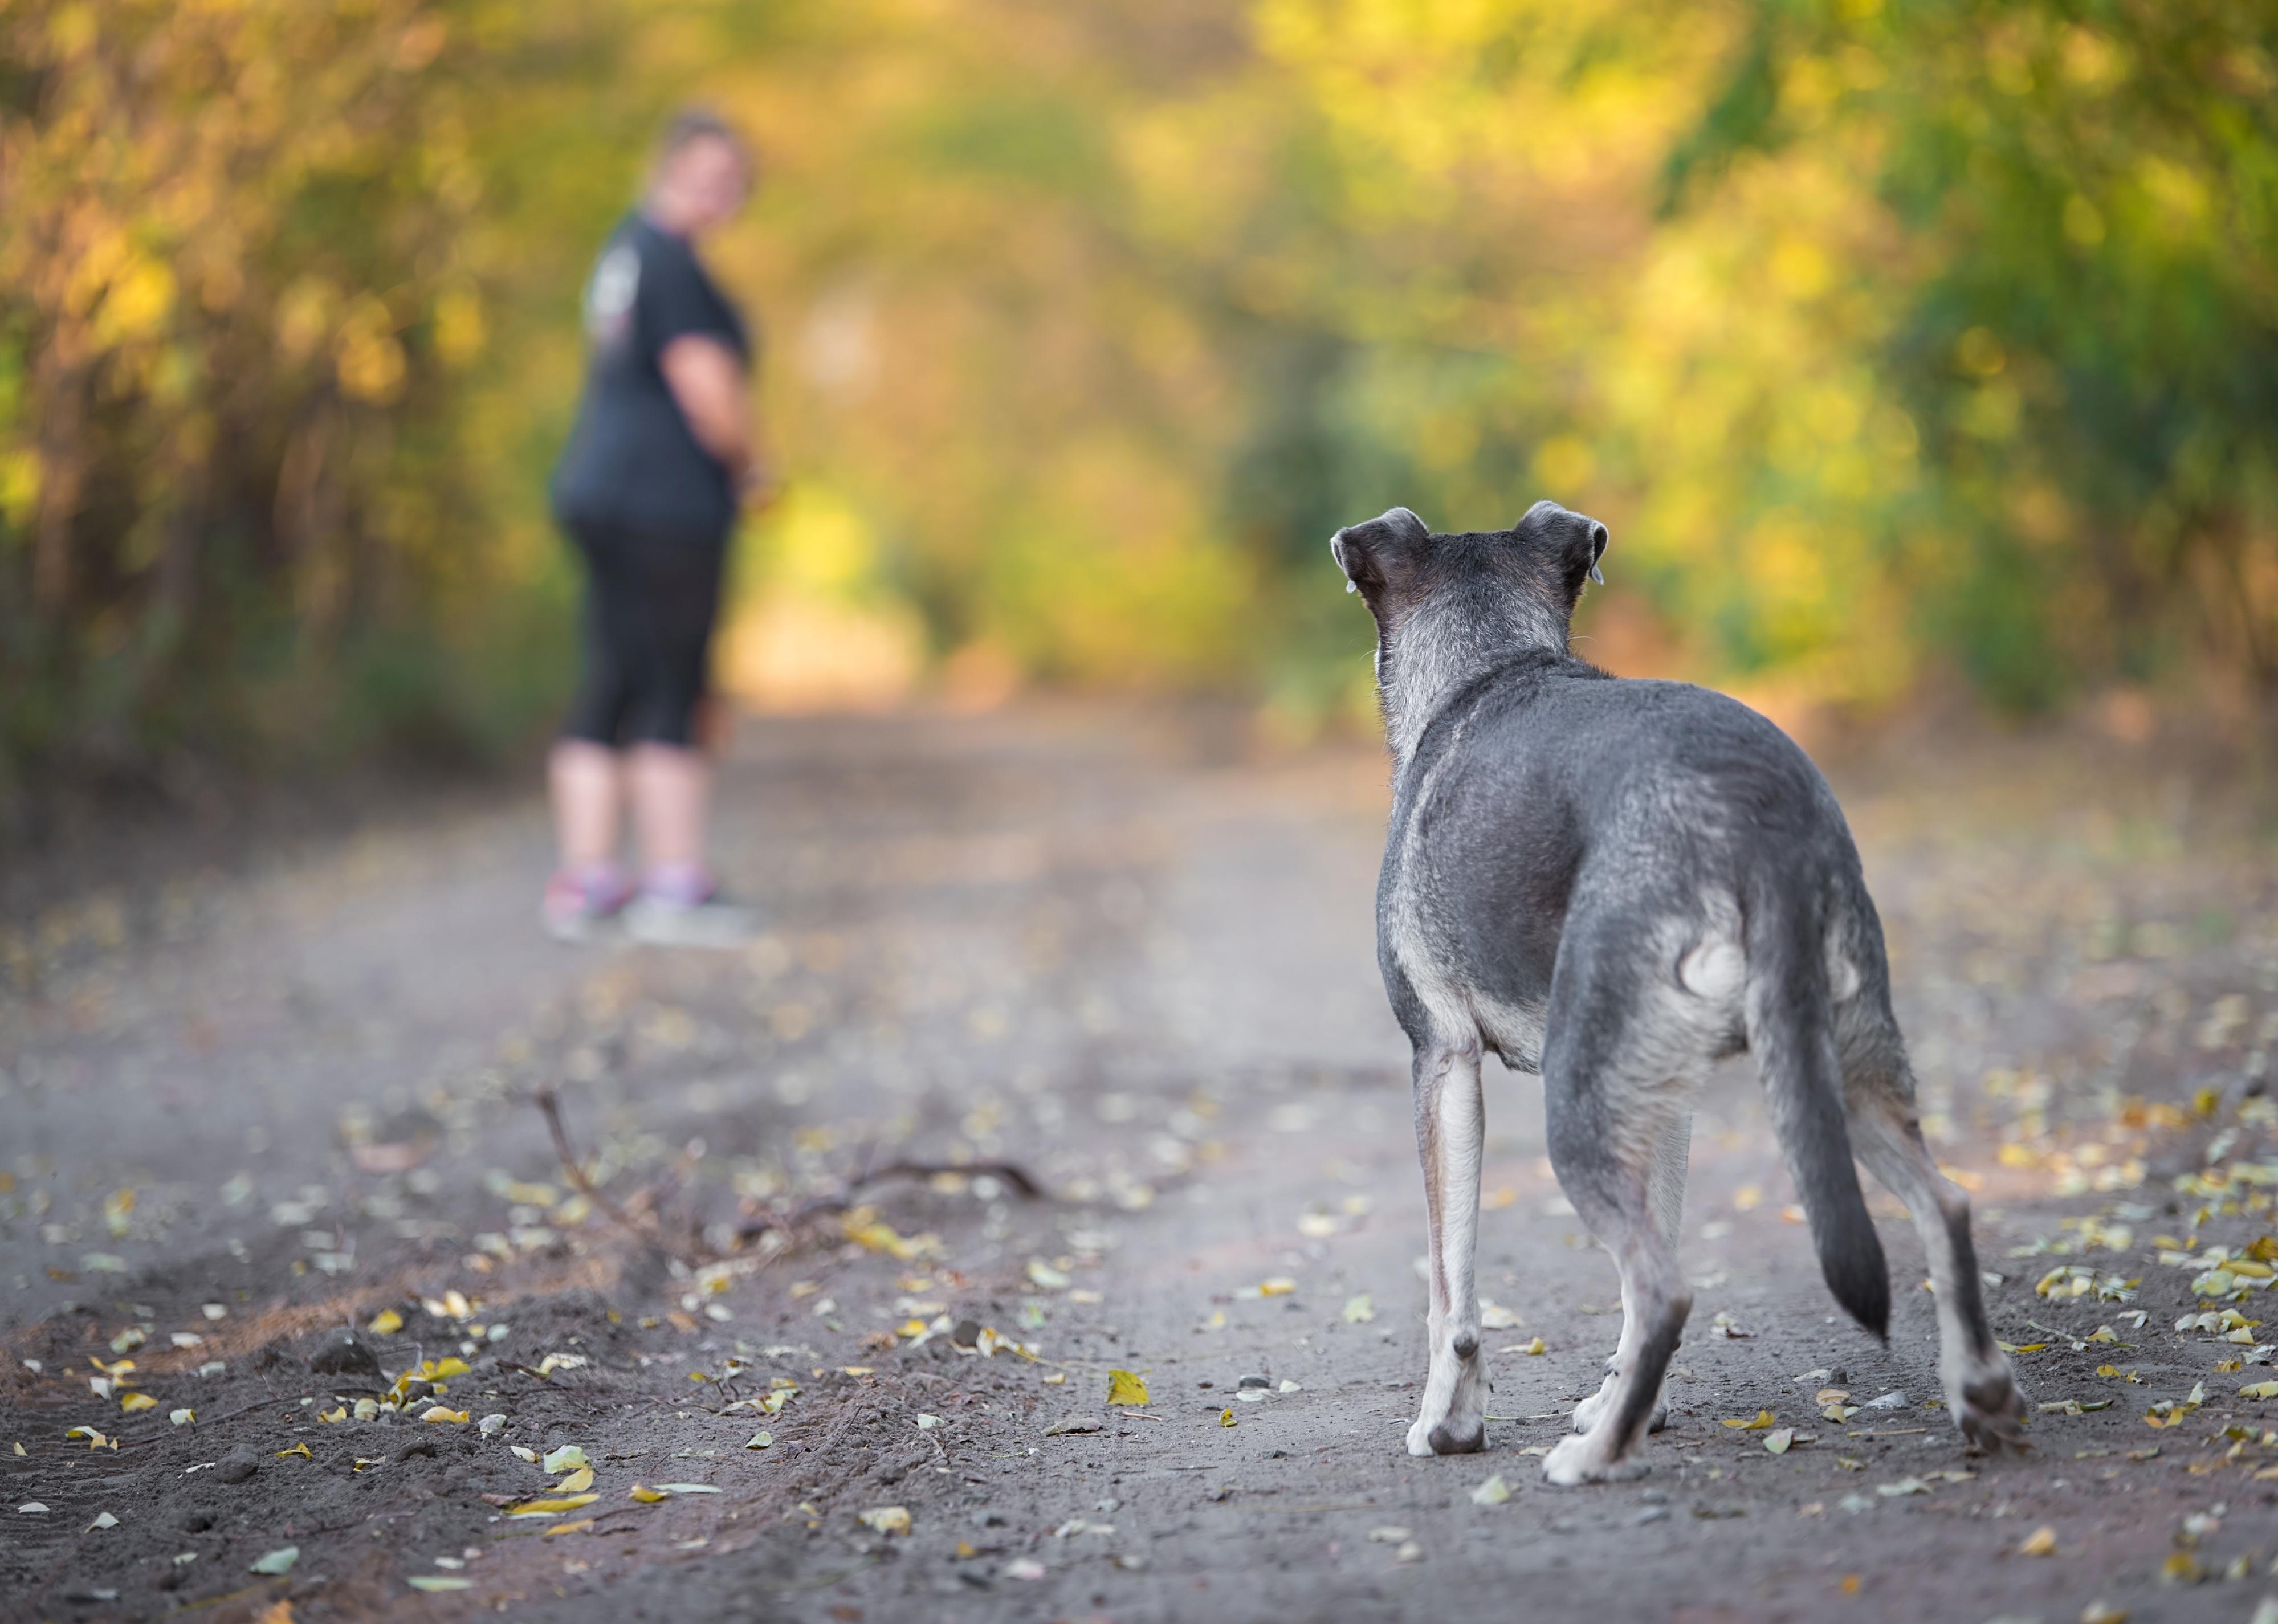 Back view of a dog looking at a person on a trail.